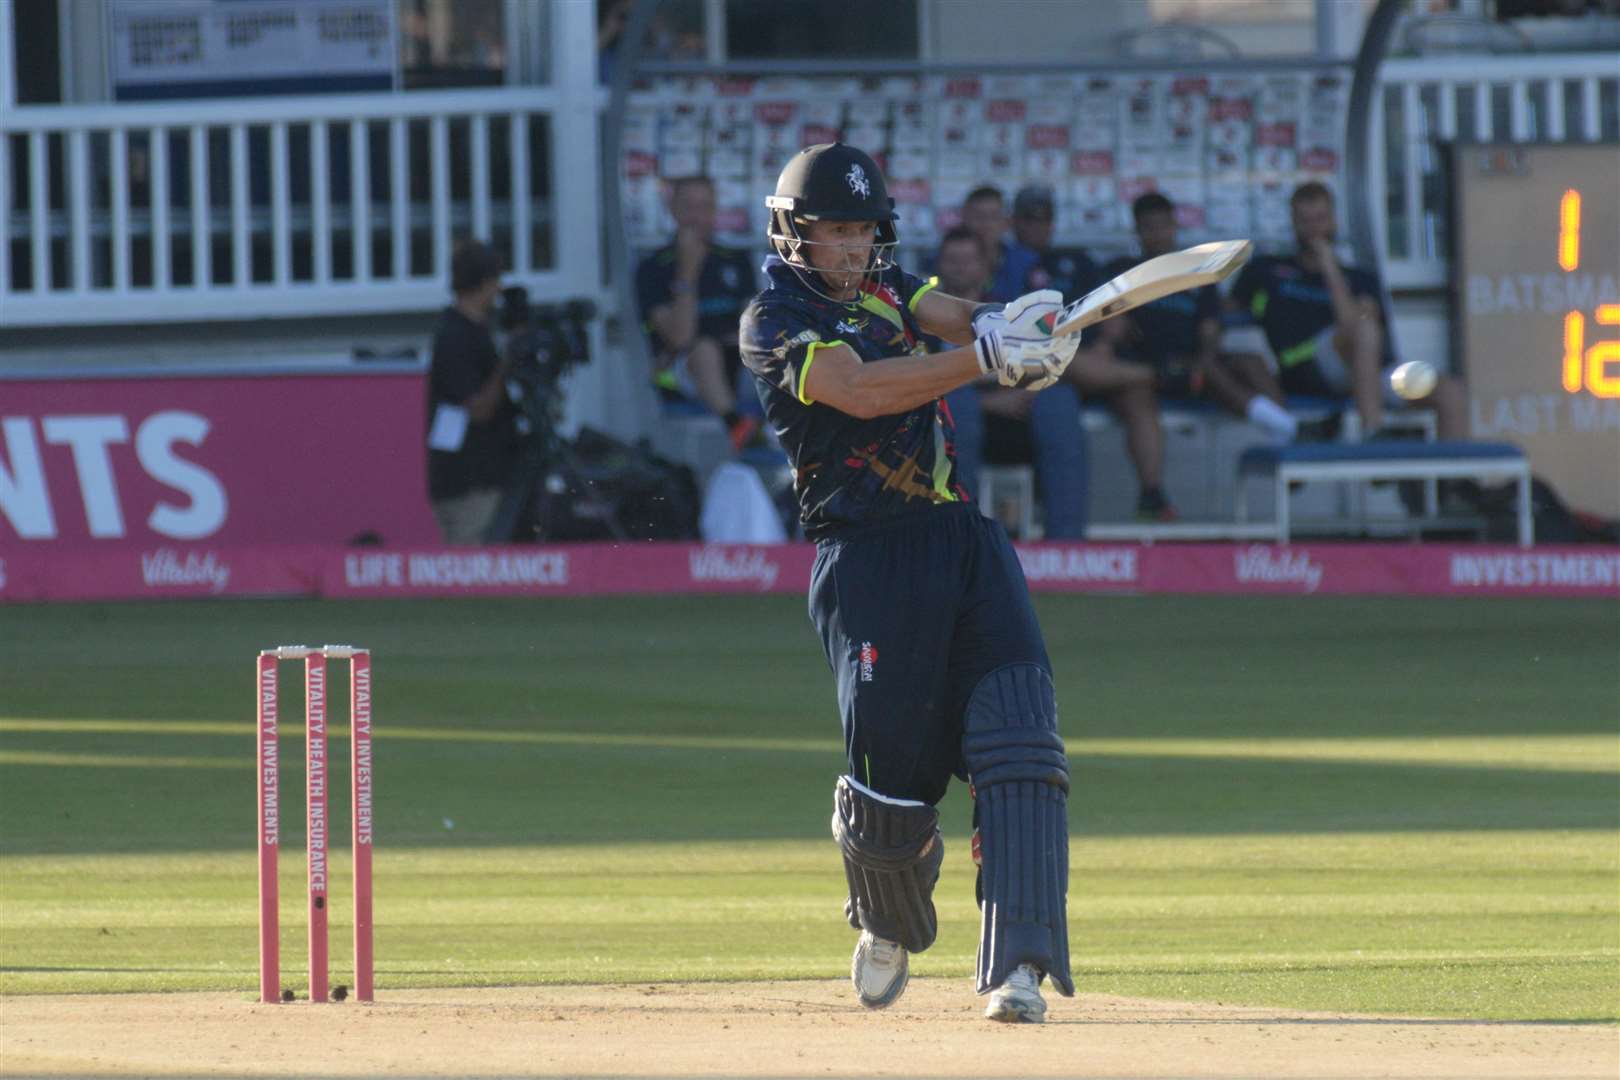 Joe Denly during a Vitality Blast T20 match at The Spitfire Ground Picture: Chris Davey